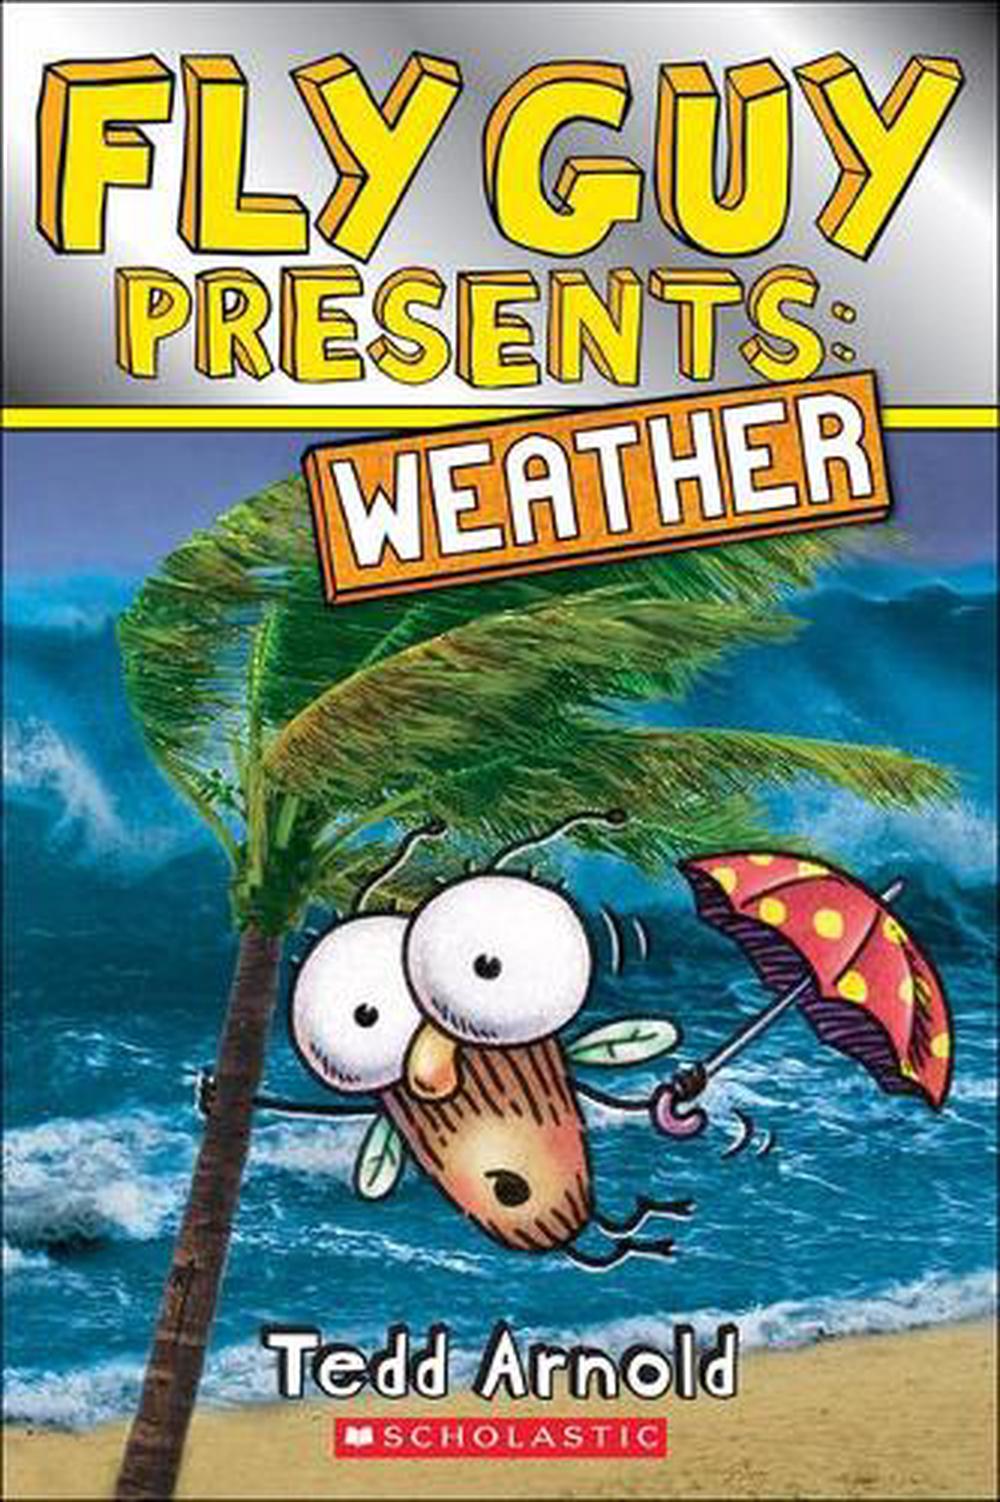 Fly Guy Presents: Weather by Tedd Arnold (English) Prebound Book Free Shipping! 9780606391610 | eBay